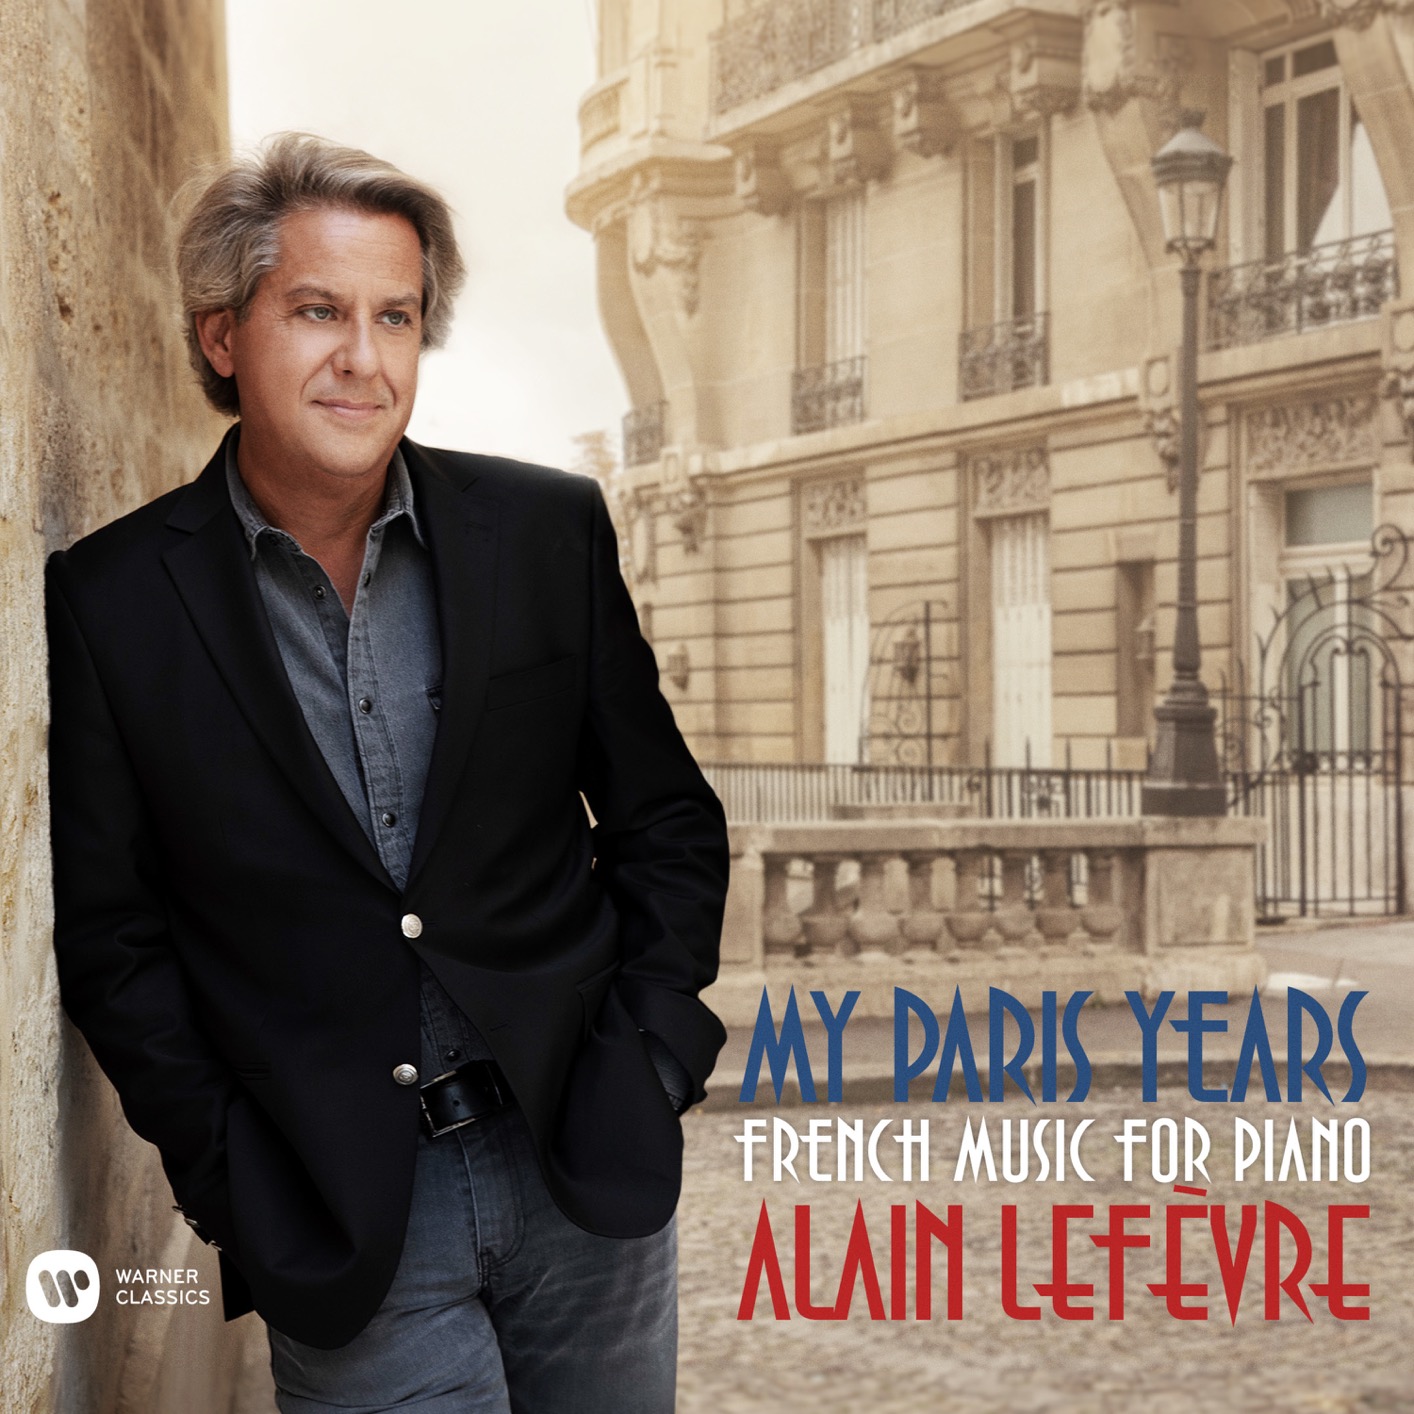 Alain Lefevre - My Paris Years - French Music for Piano (2019) [FLAC 24bit/96kHz]